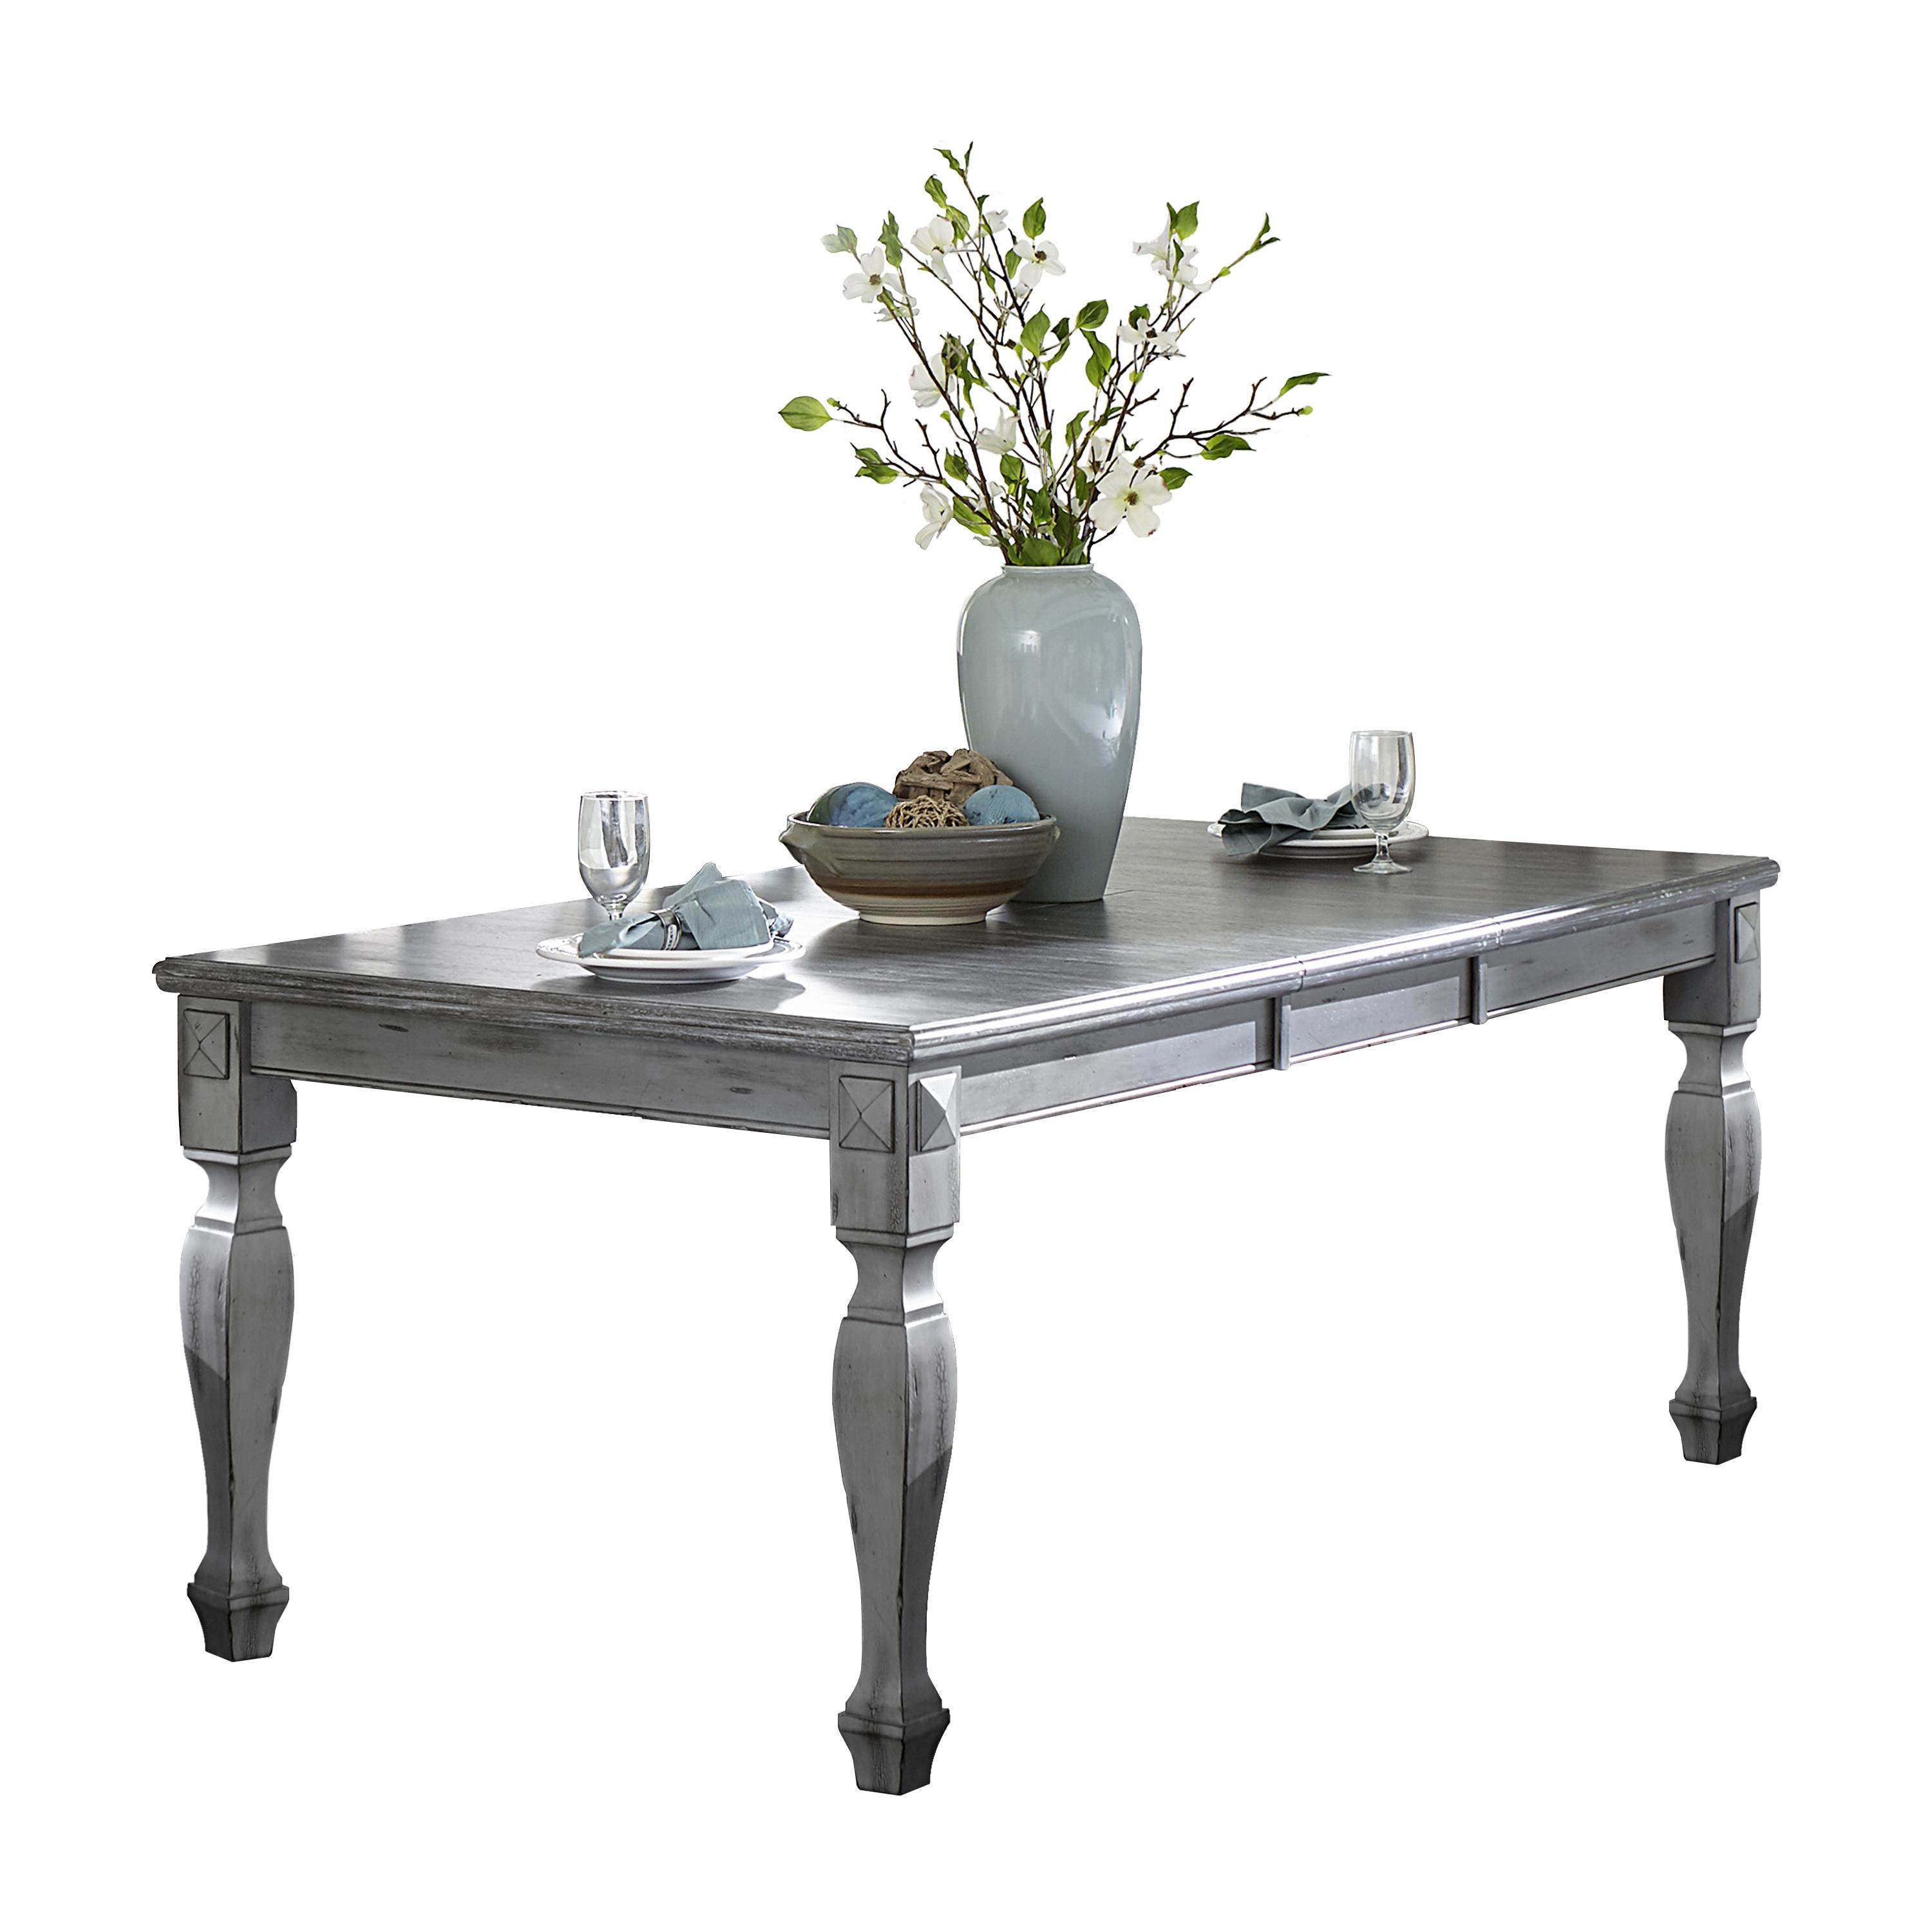 Traditional Dining Table 5520-78 Fulbright 5520-78 in Gray 